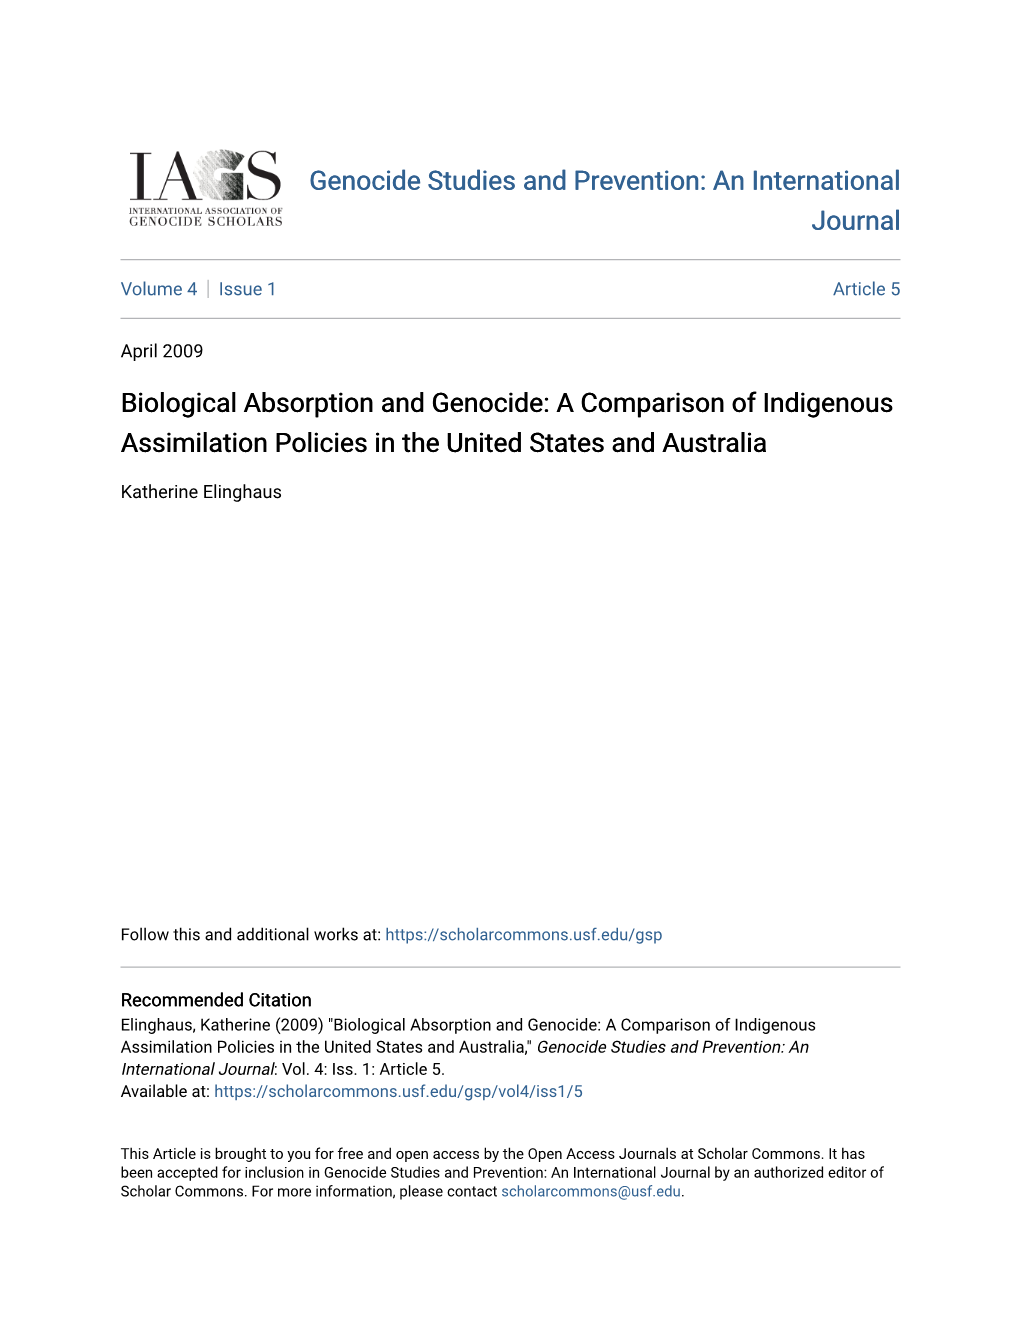 Biological Absorption and Genocide: a Comparison of Indigenous Assimilation Policies in the United States and Australia